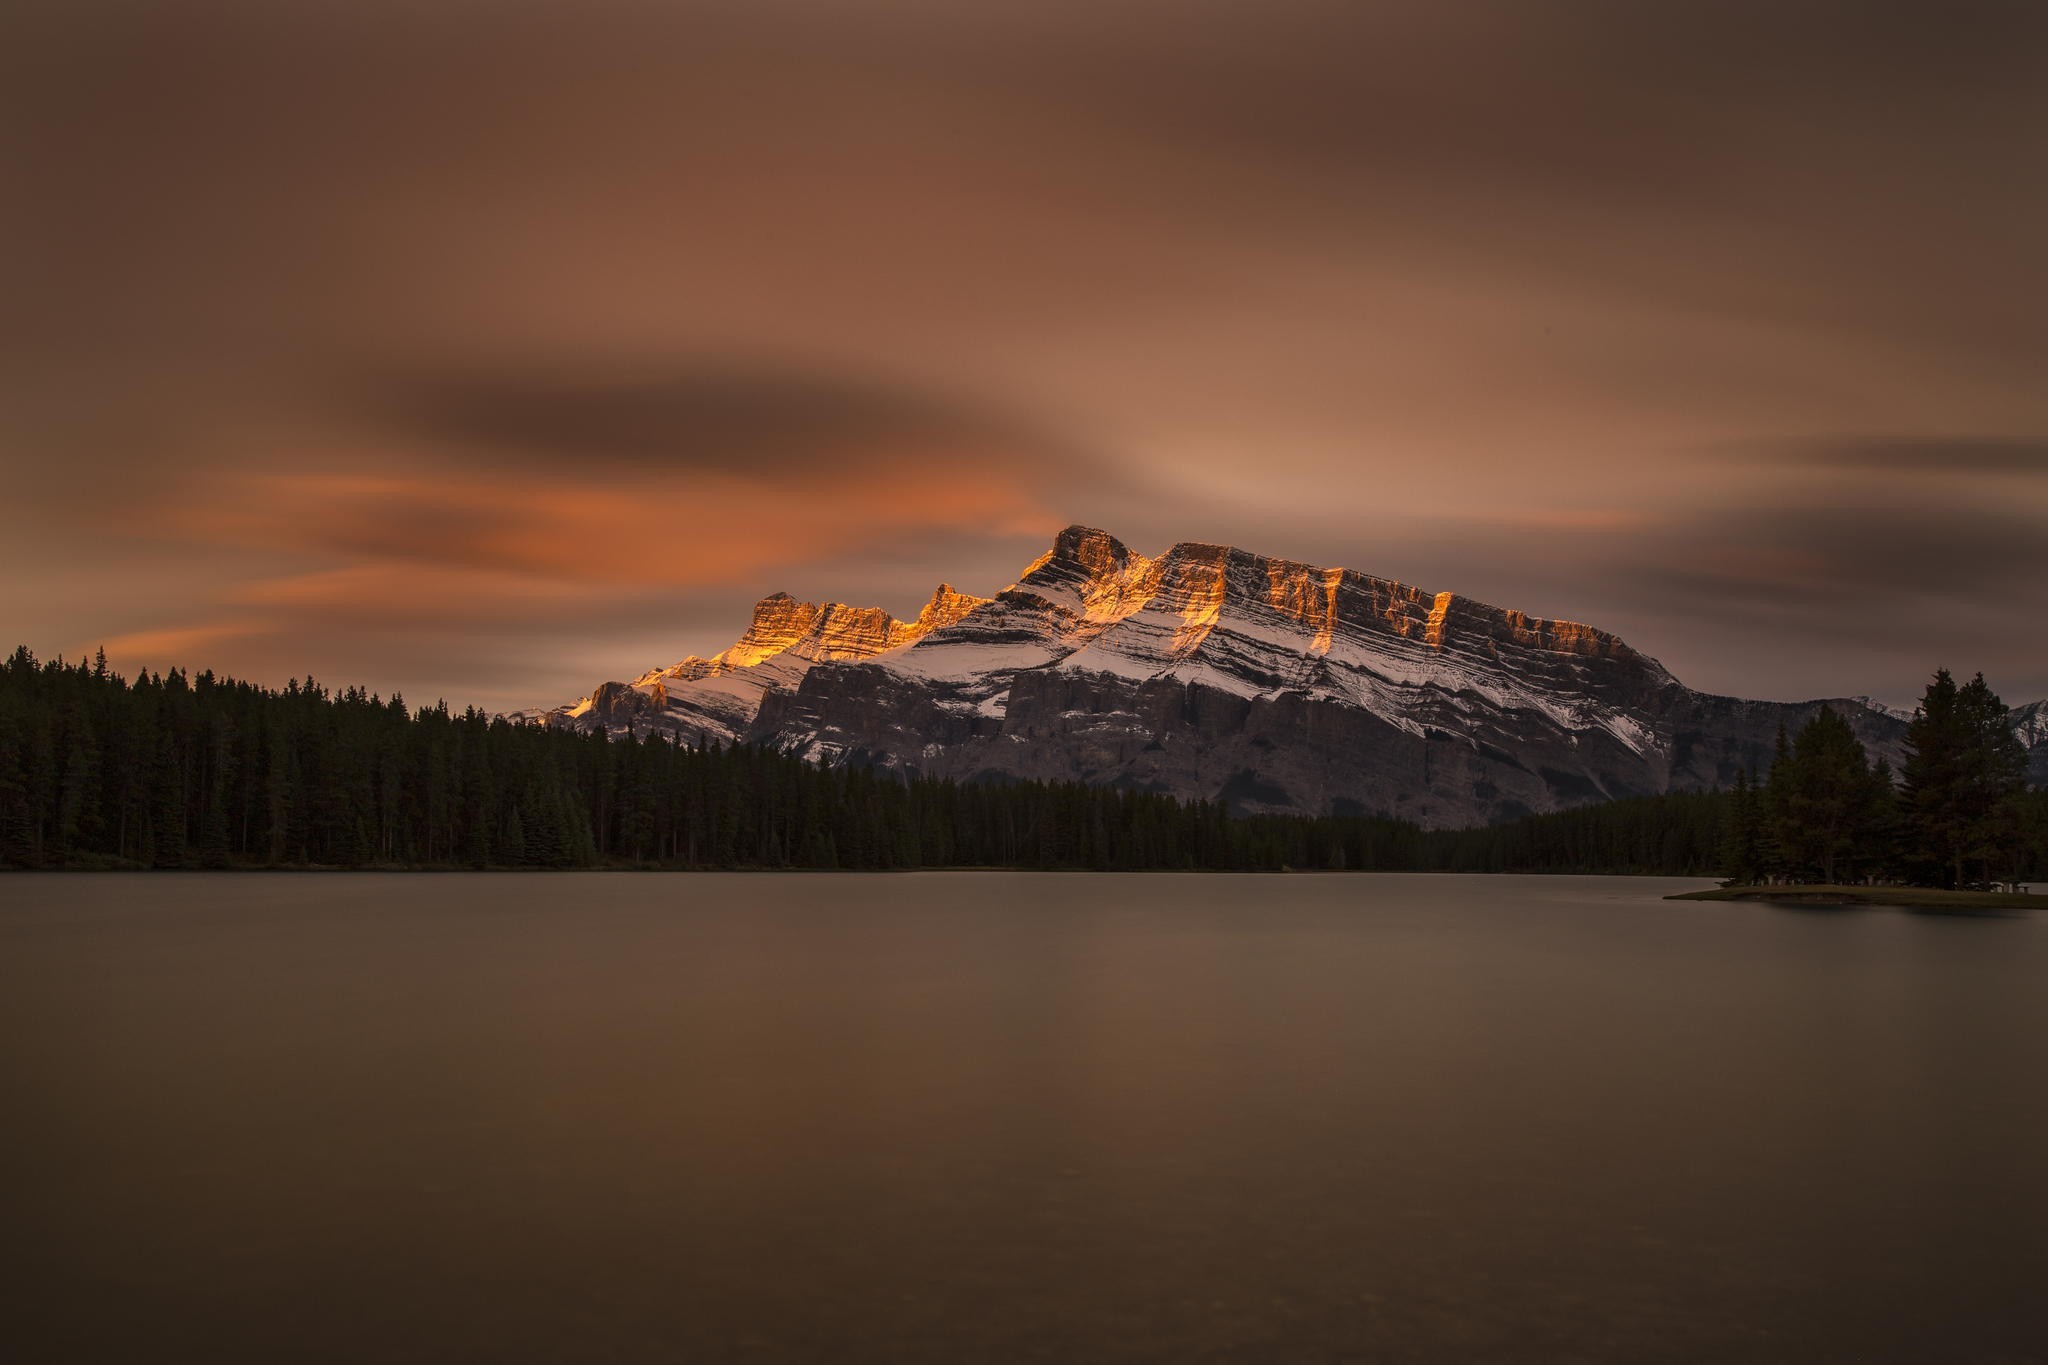 General 2048x1365 nature landscape mountains trees forest water lake clouds Canada sunlight snow long exposure overcast island brown Banff National Park Alberta Mount Rundle low light Two Jack Lake